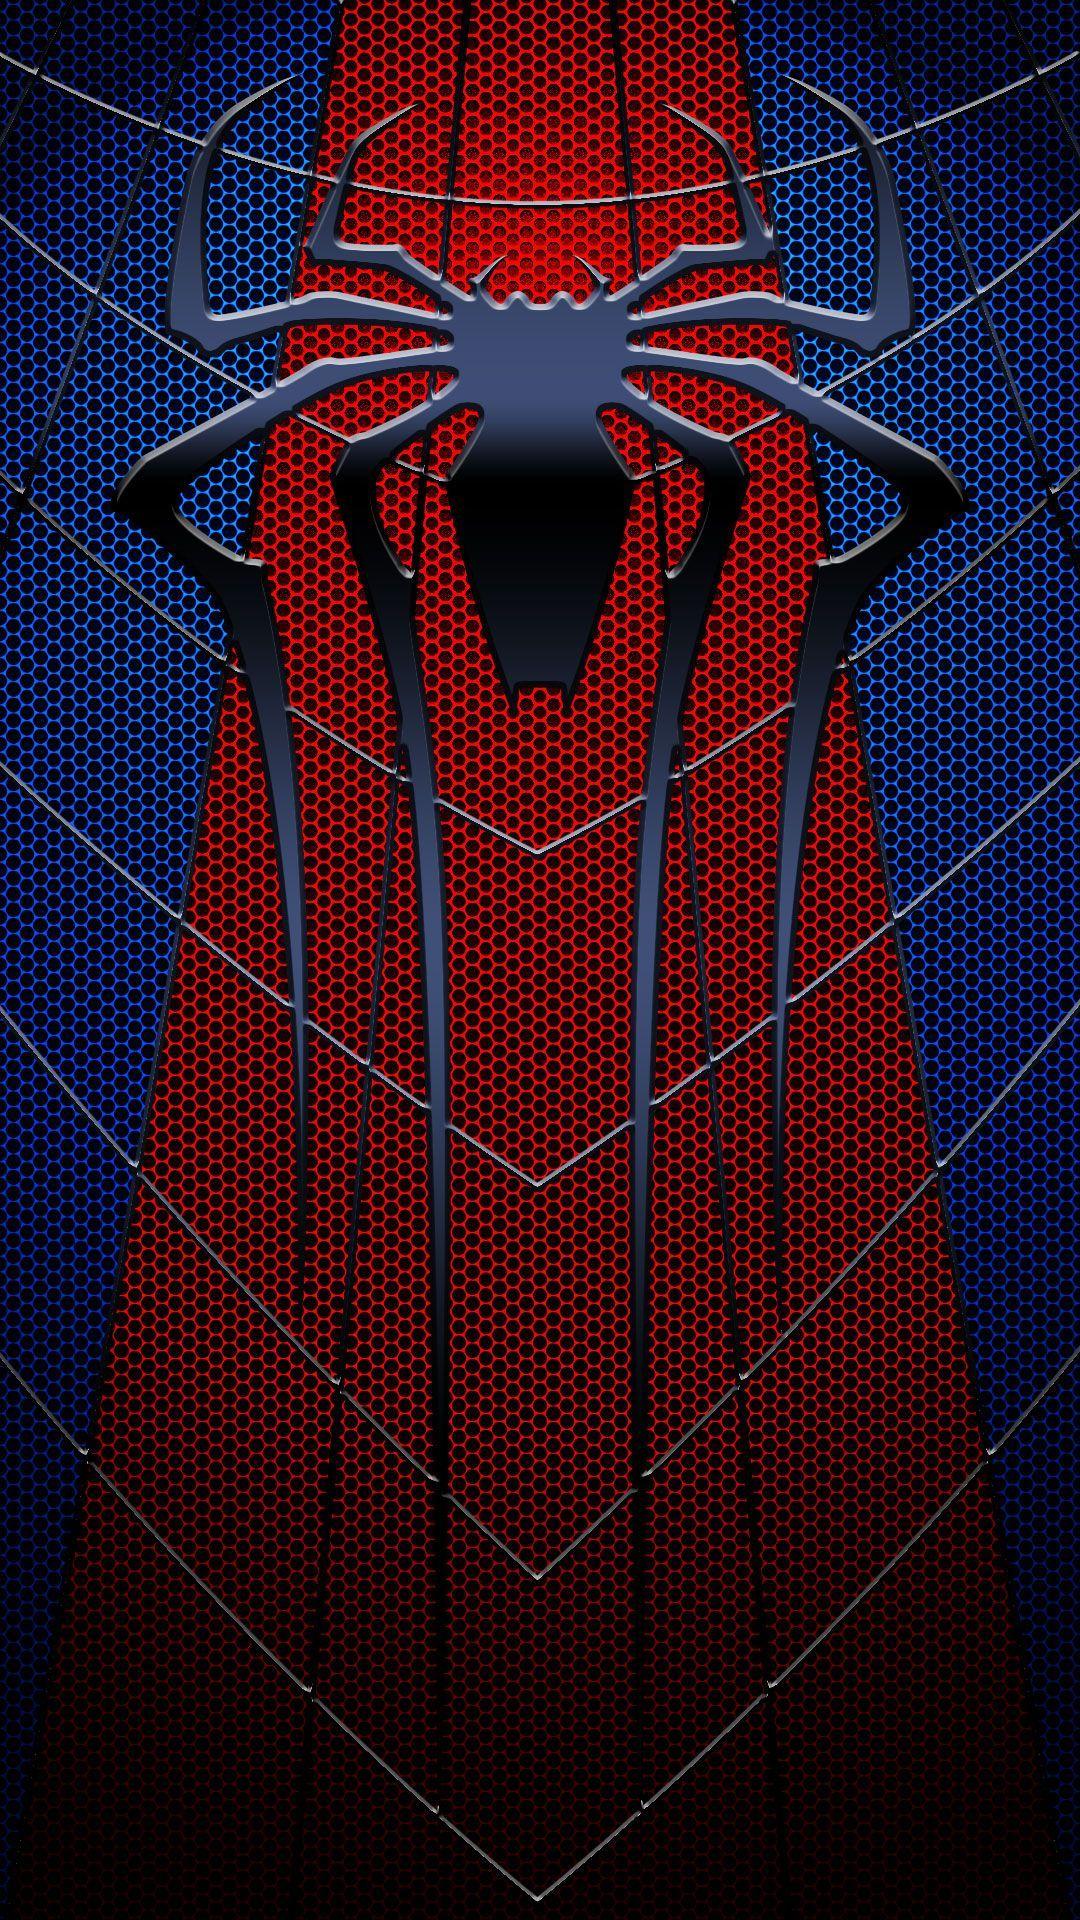 Spider-Man Cell Phone Wallpapers - Top Free Spider-Man ...